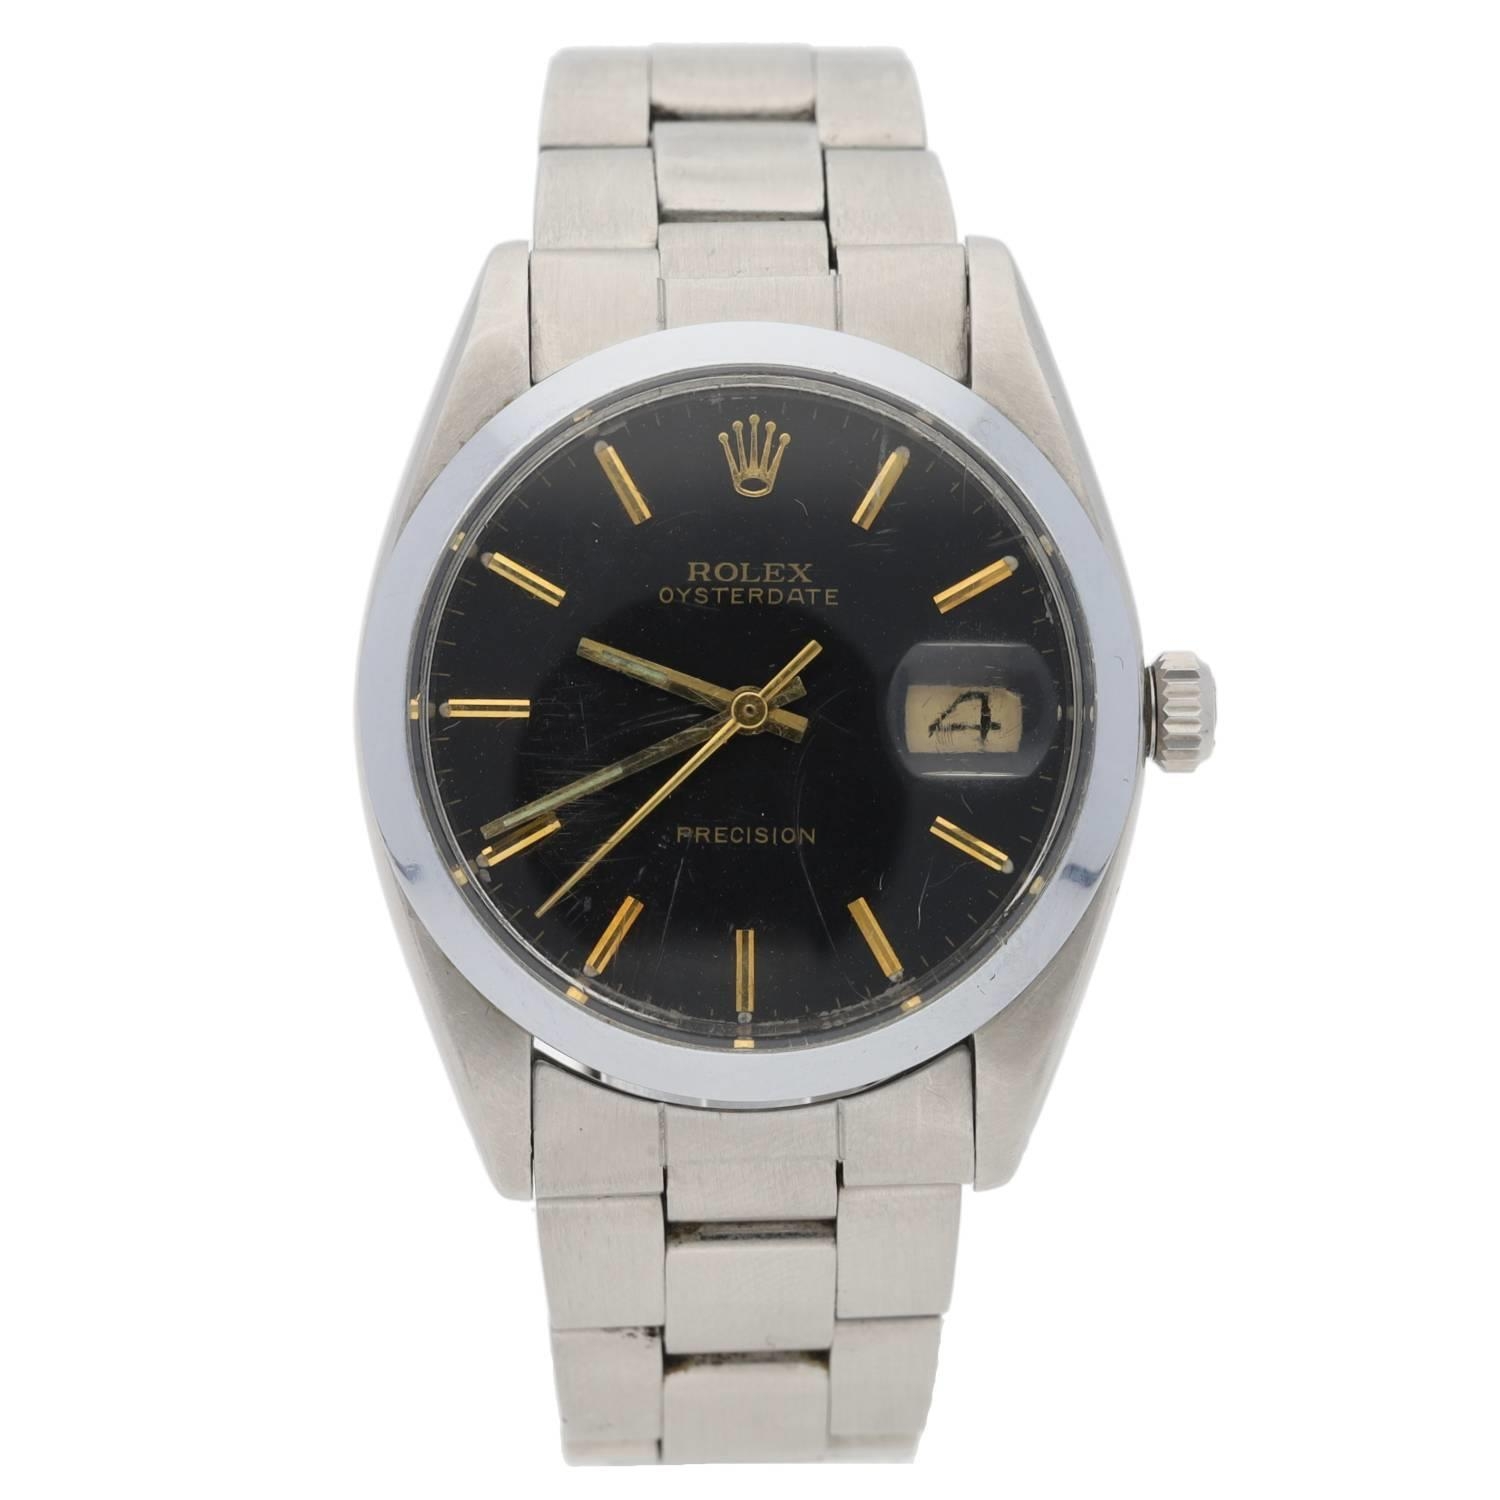 Rolex Oysterdate Precision stainless steel gentleman’s wristwatch, reference no.  6694, serial no.